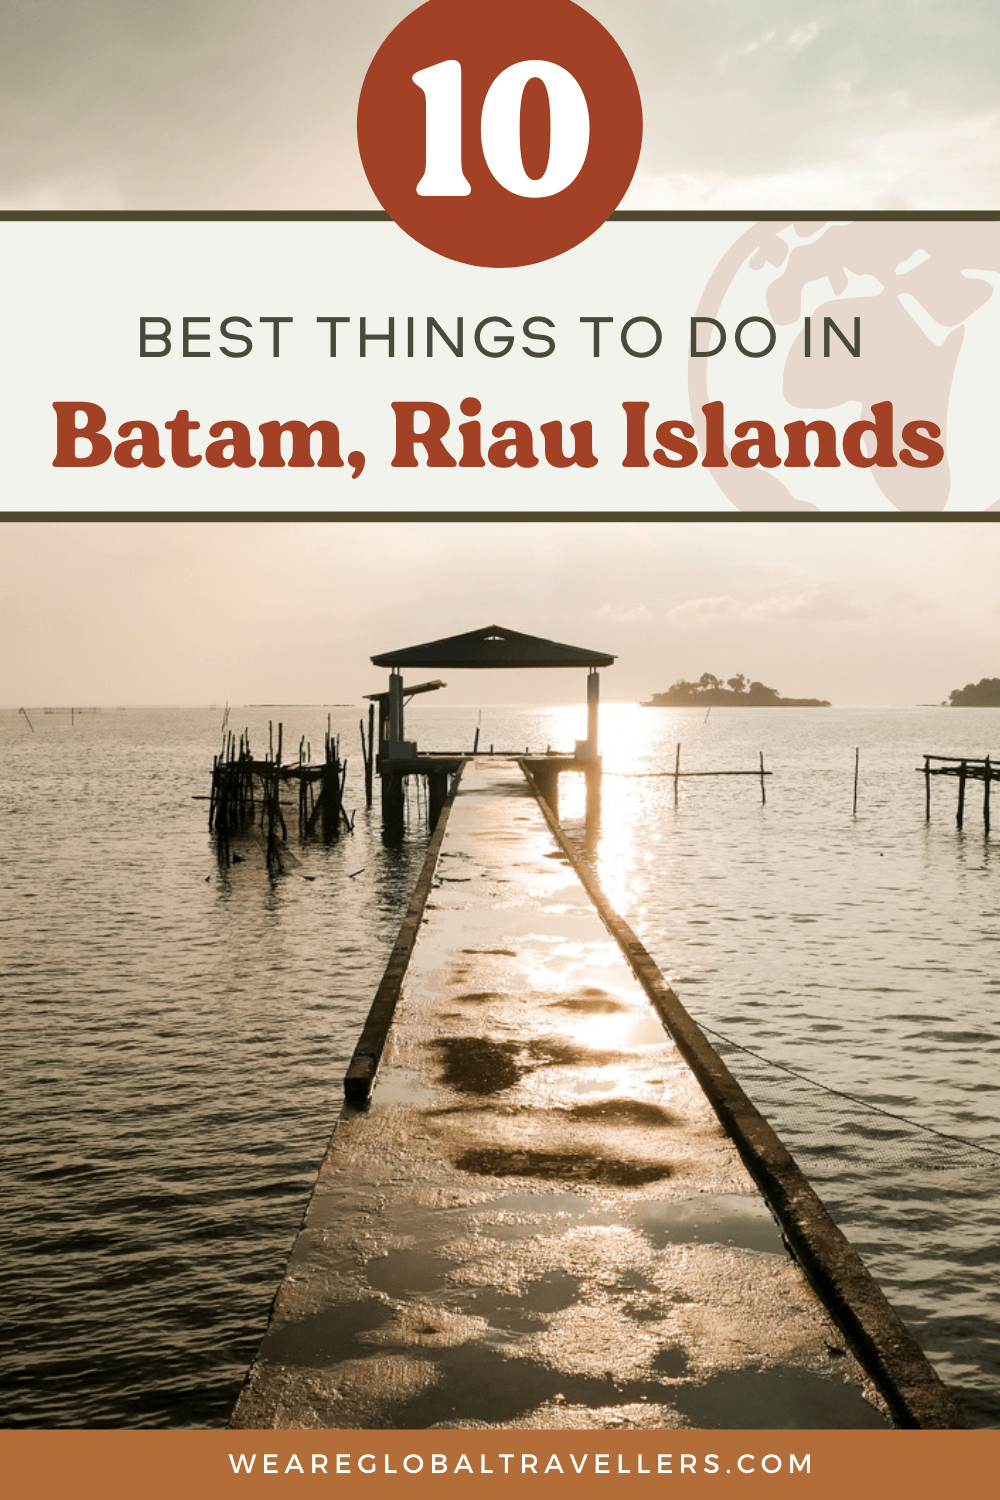 The best things to do in Batam, Riau Islands